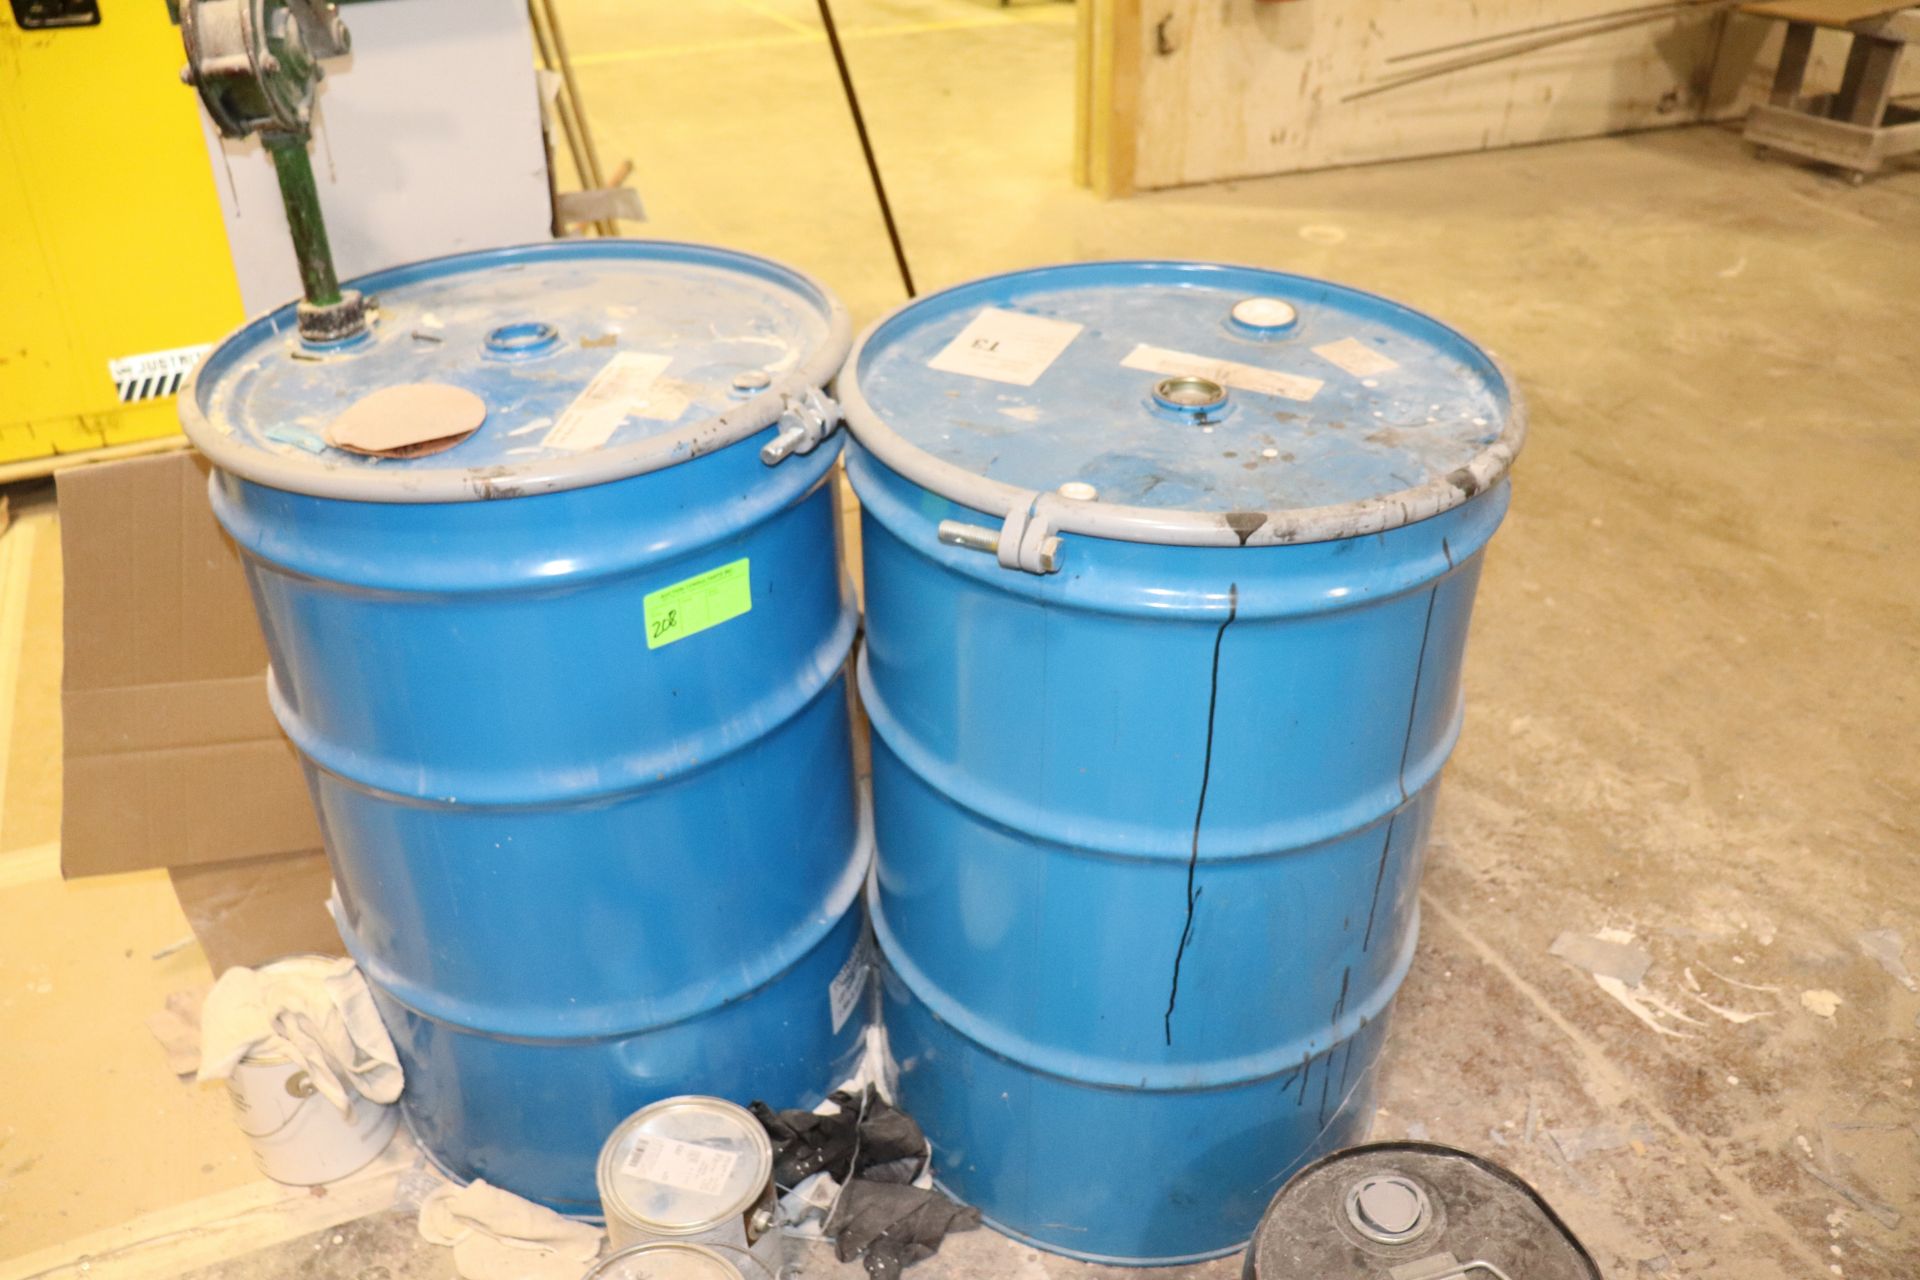 Two 55-gallon drums of WB stain base and 1 barrel of Aqualux Satin 2, sealed